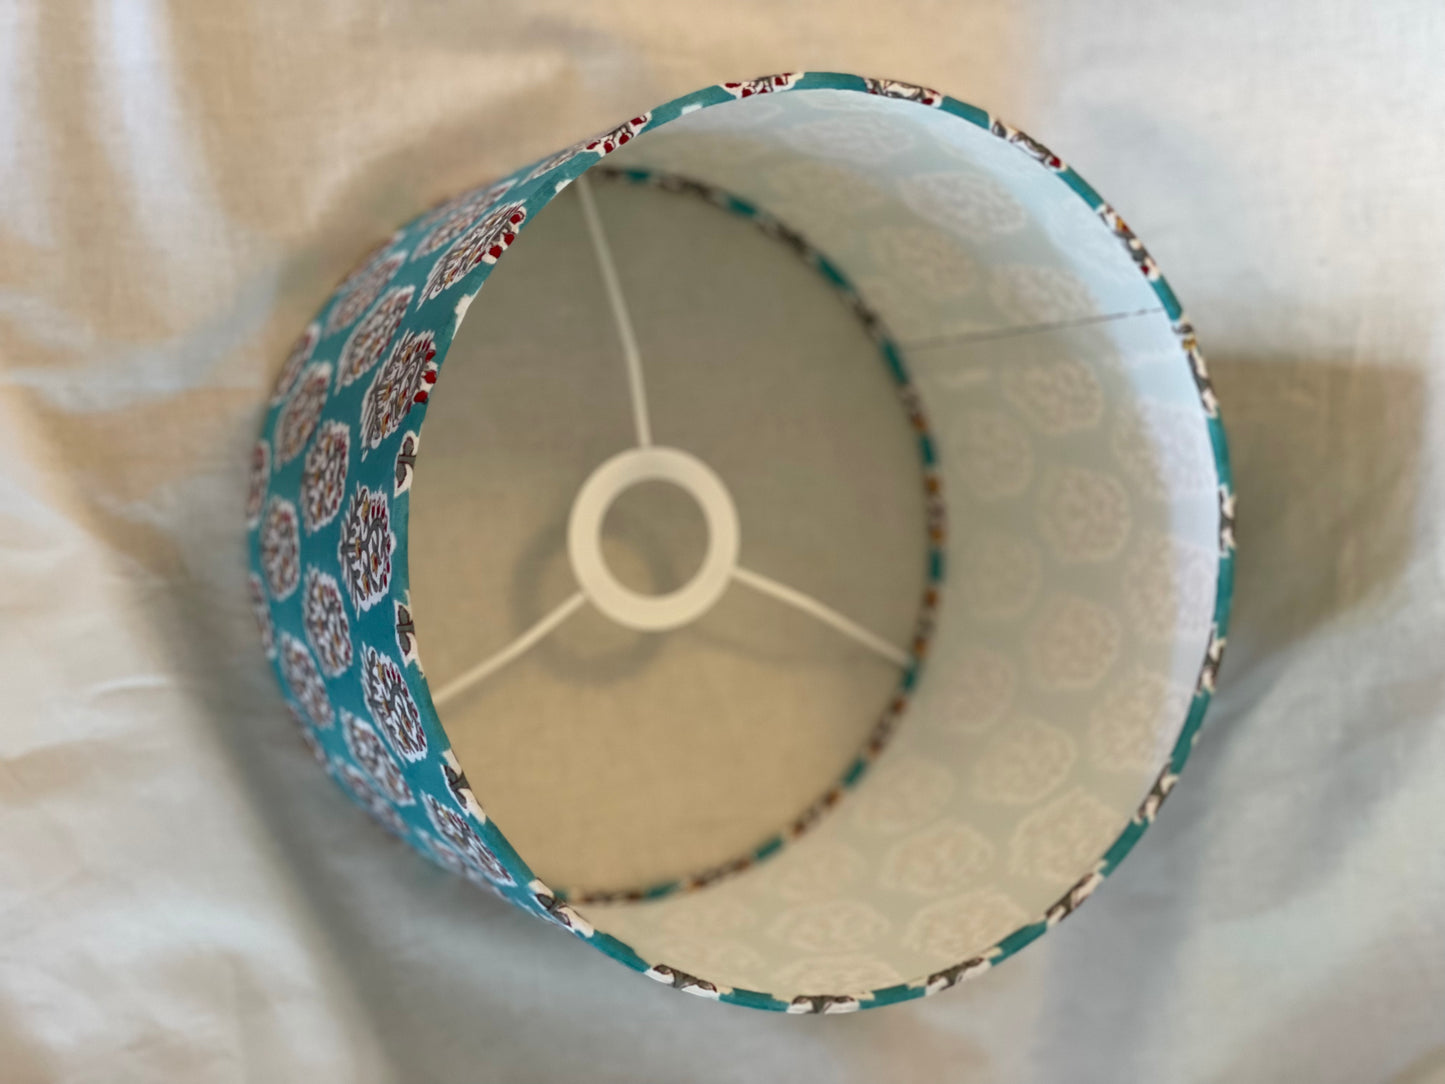 10 inch Drum Lampshade. Indian Hand Block Print from Jaipur. Turquoise with Crimson, Ochre and Taupe Floral Motif.